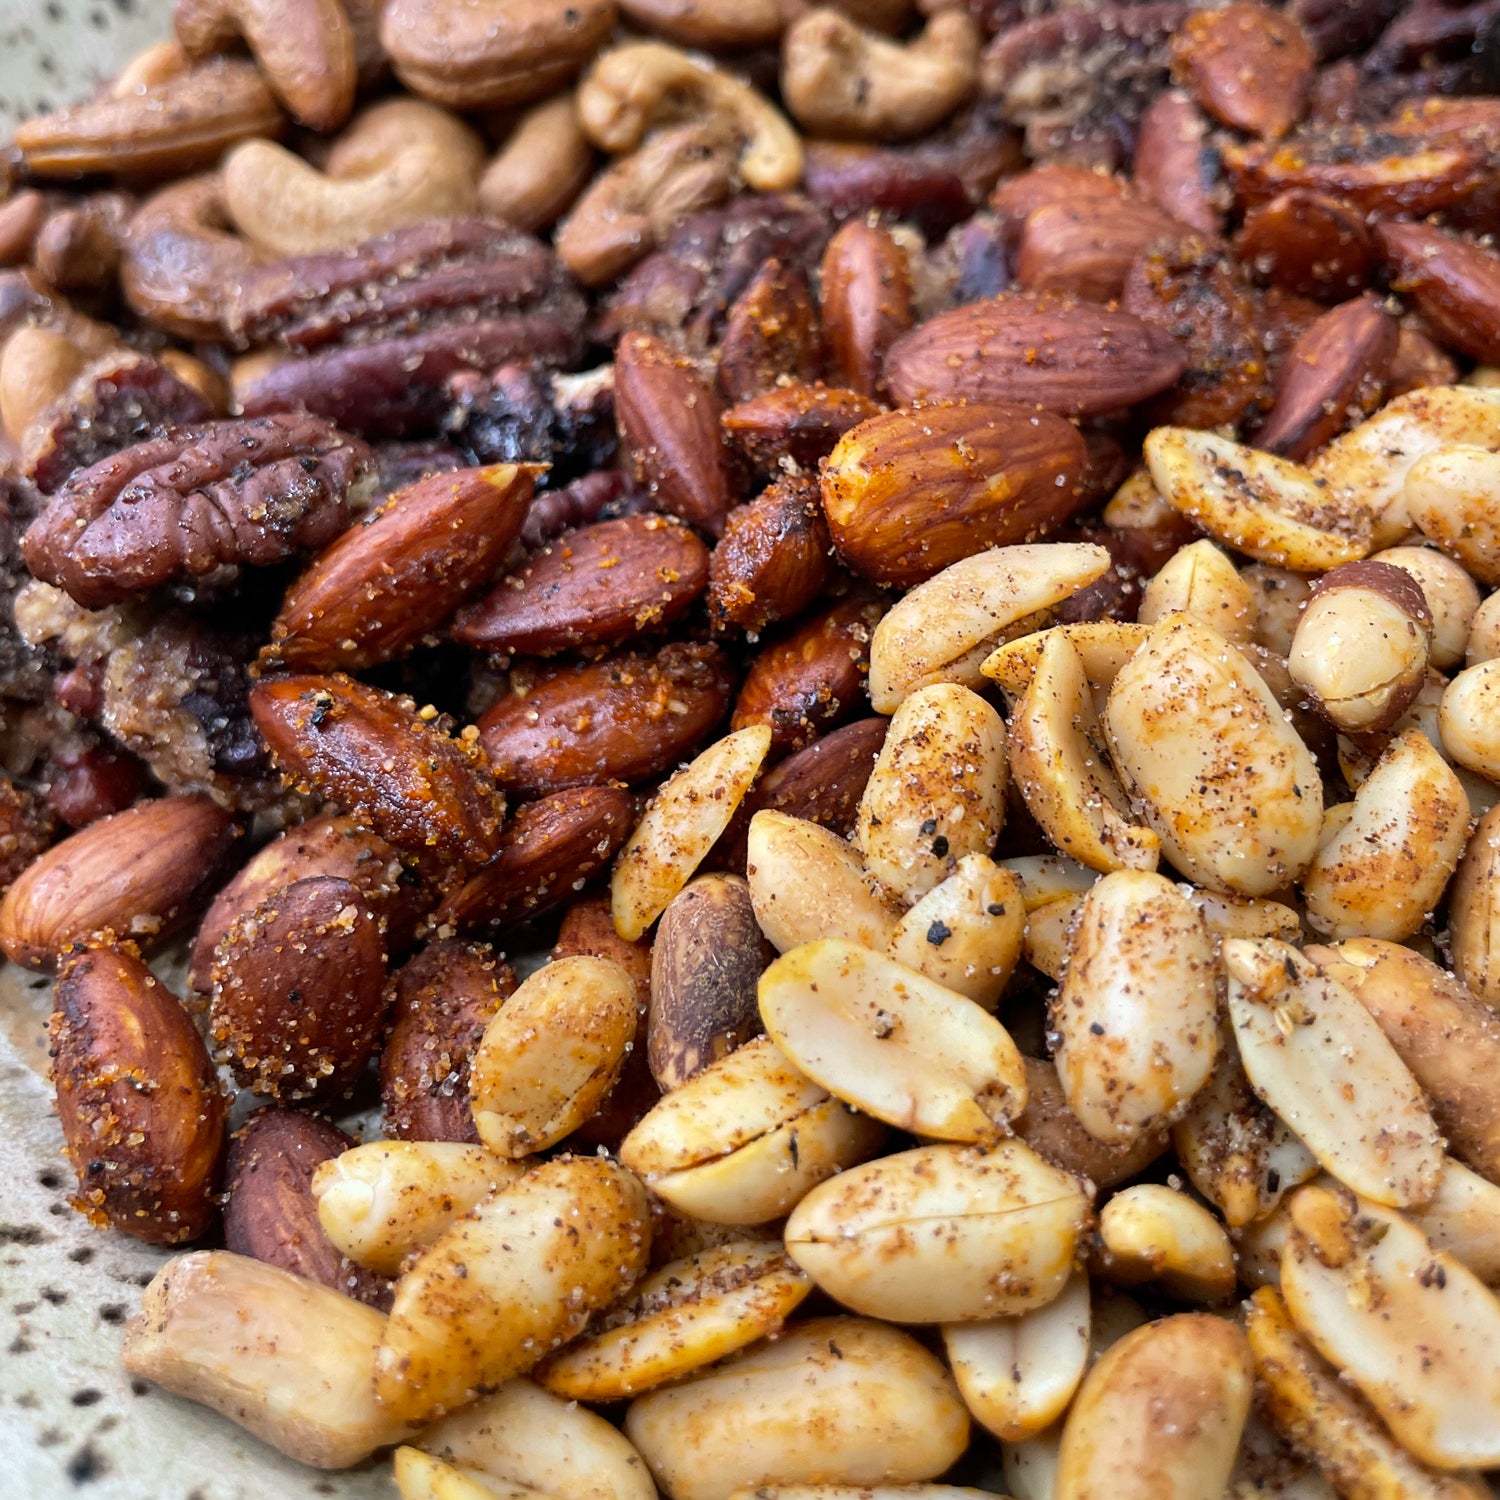 Wholesale BBQ Honey Roasted Mixed Nuts